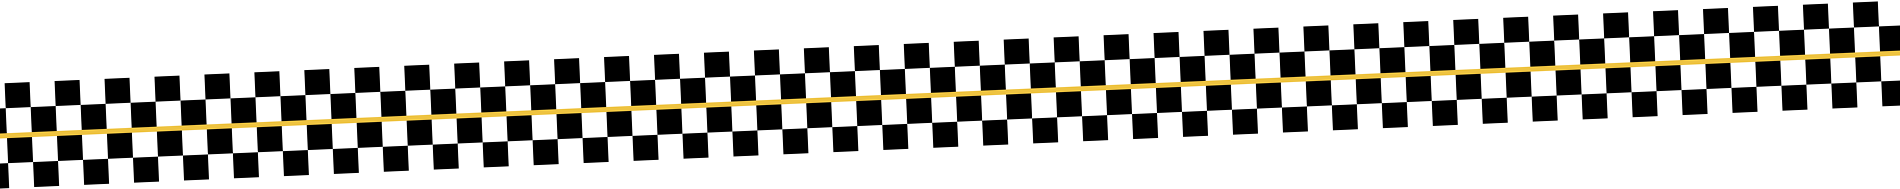 Finish Line Png Clipart Png Mart